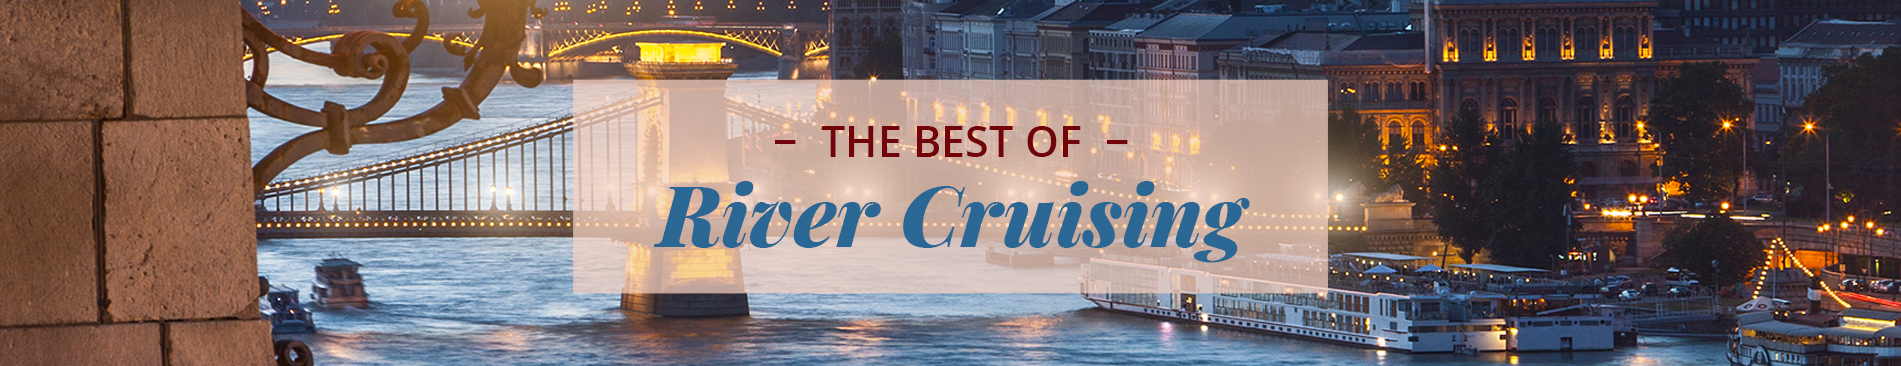 The Best of River Cruising